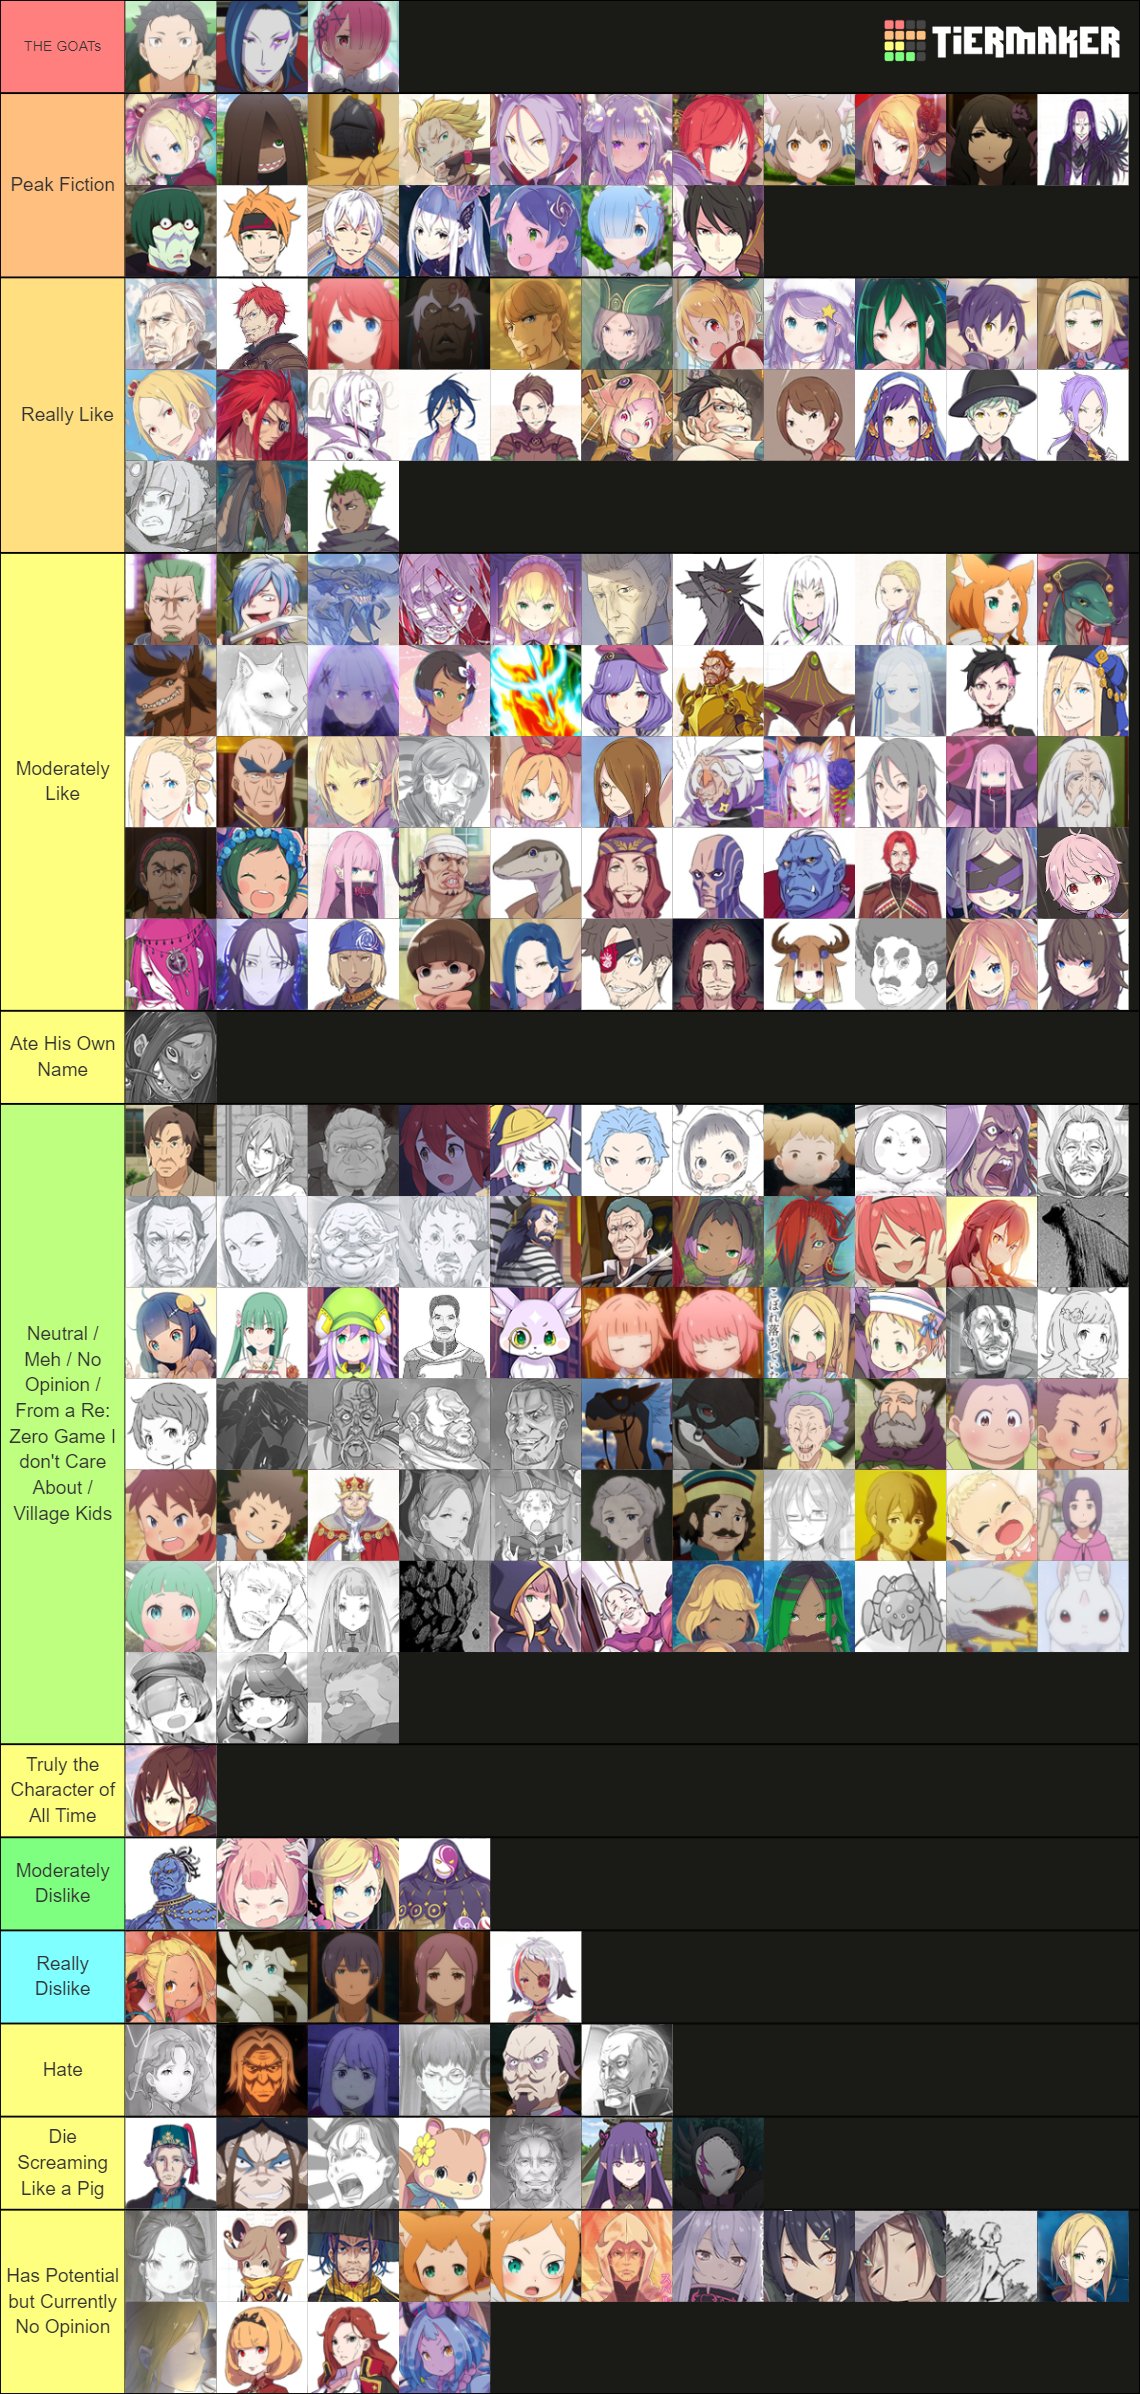 Create a GOAT Anime Characters Tier List - TierMaker